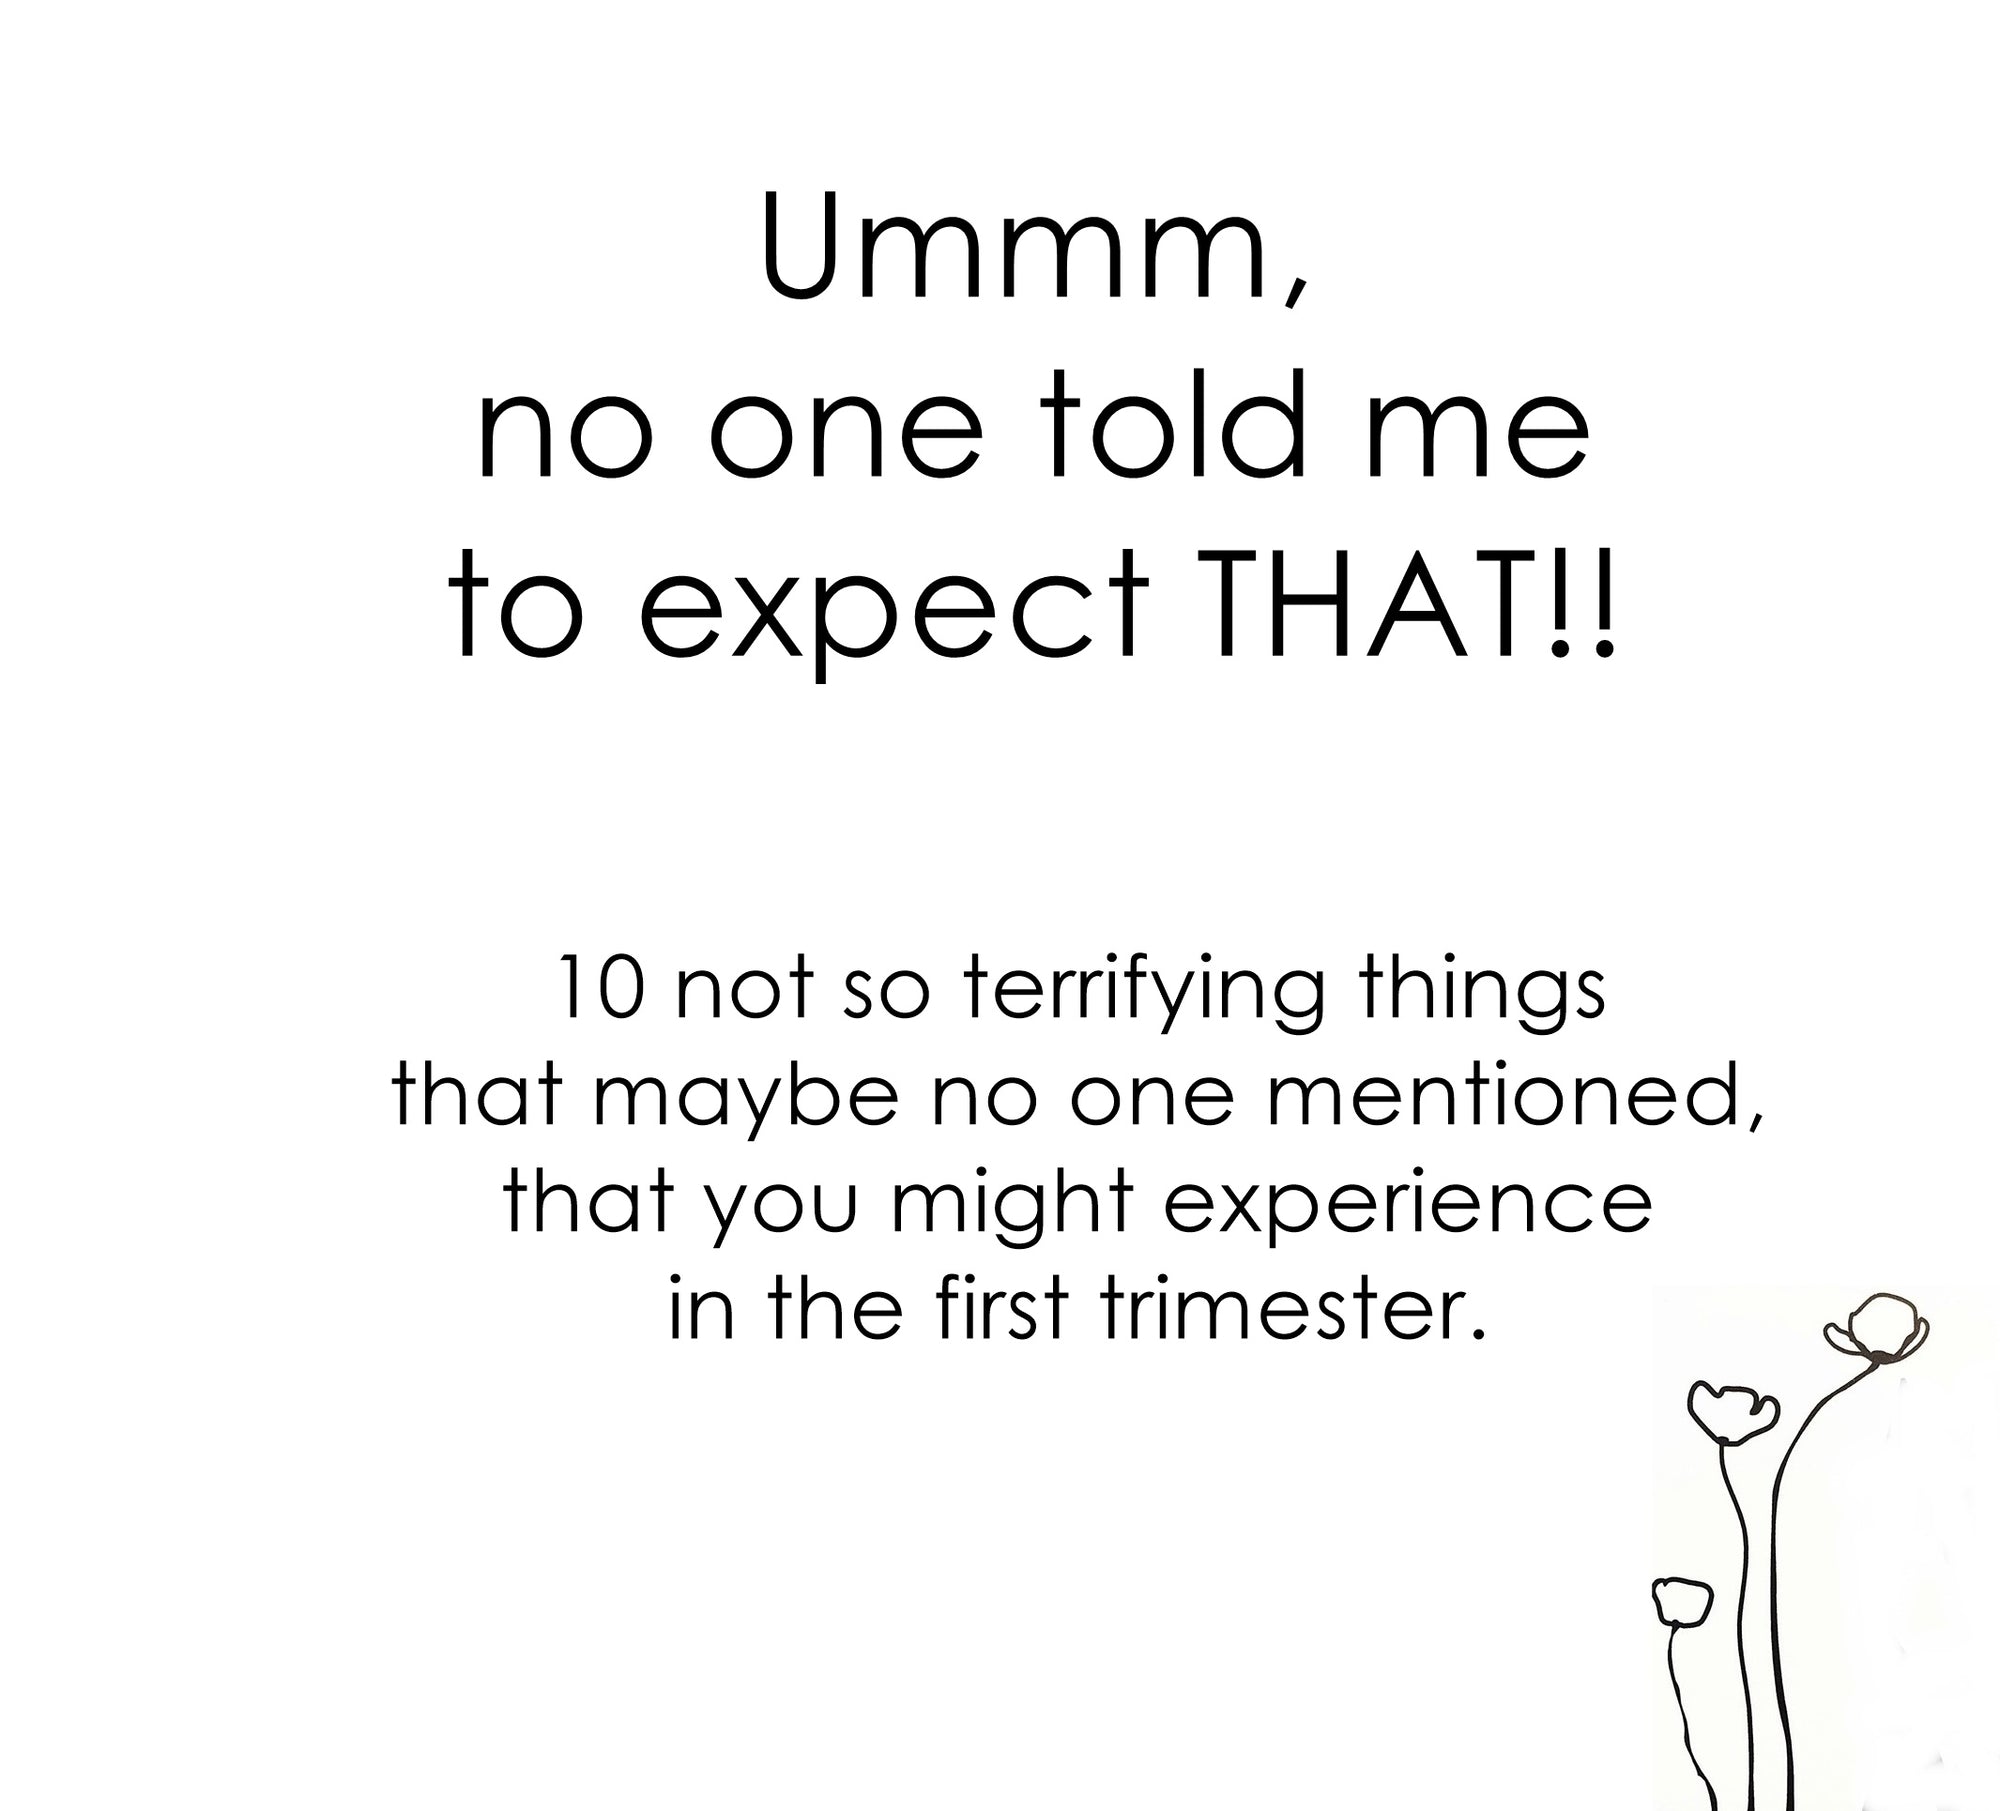 What to expect when you're expecting-that no one mentioned!